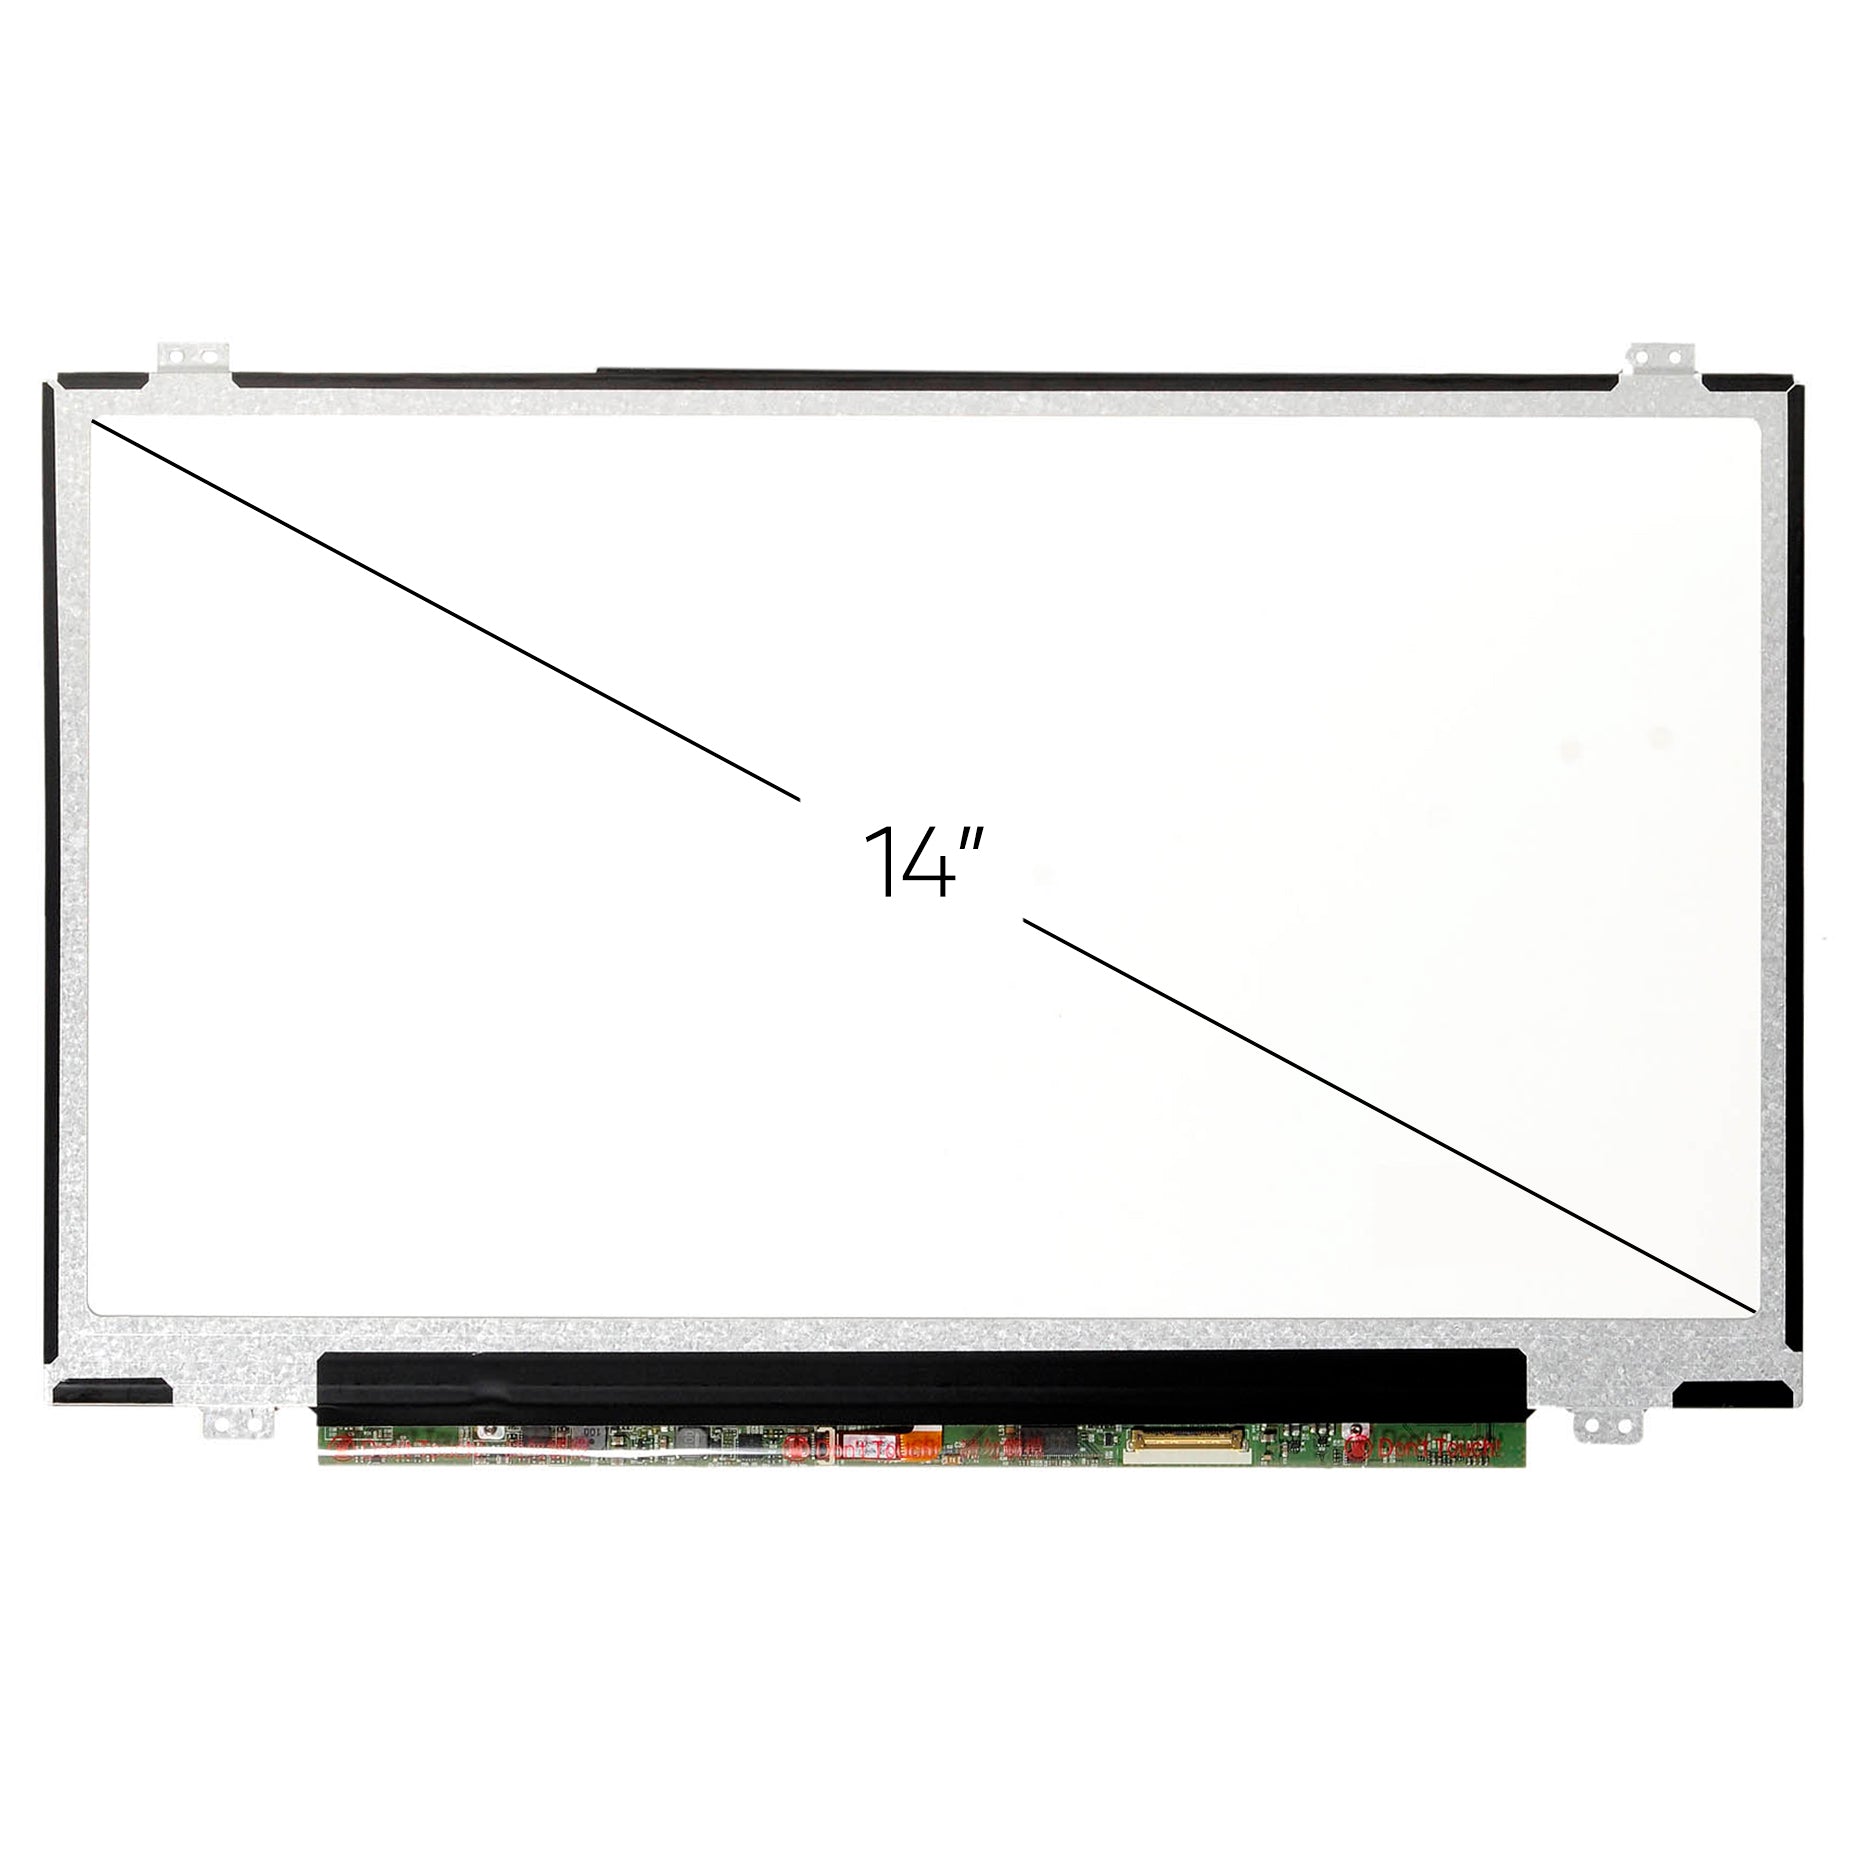 Screen Replacement for Lenovo FRU 00NY436 P/N SD10K93482 FHD 1920x1080 IPS Matte LCD LED Display